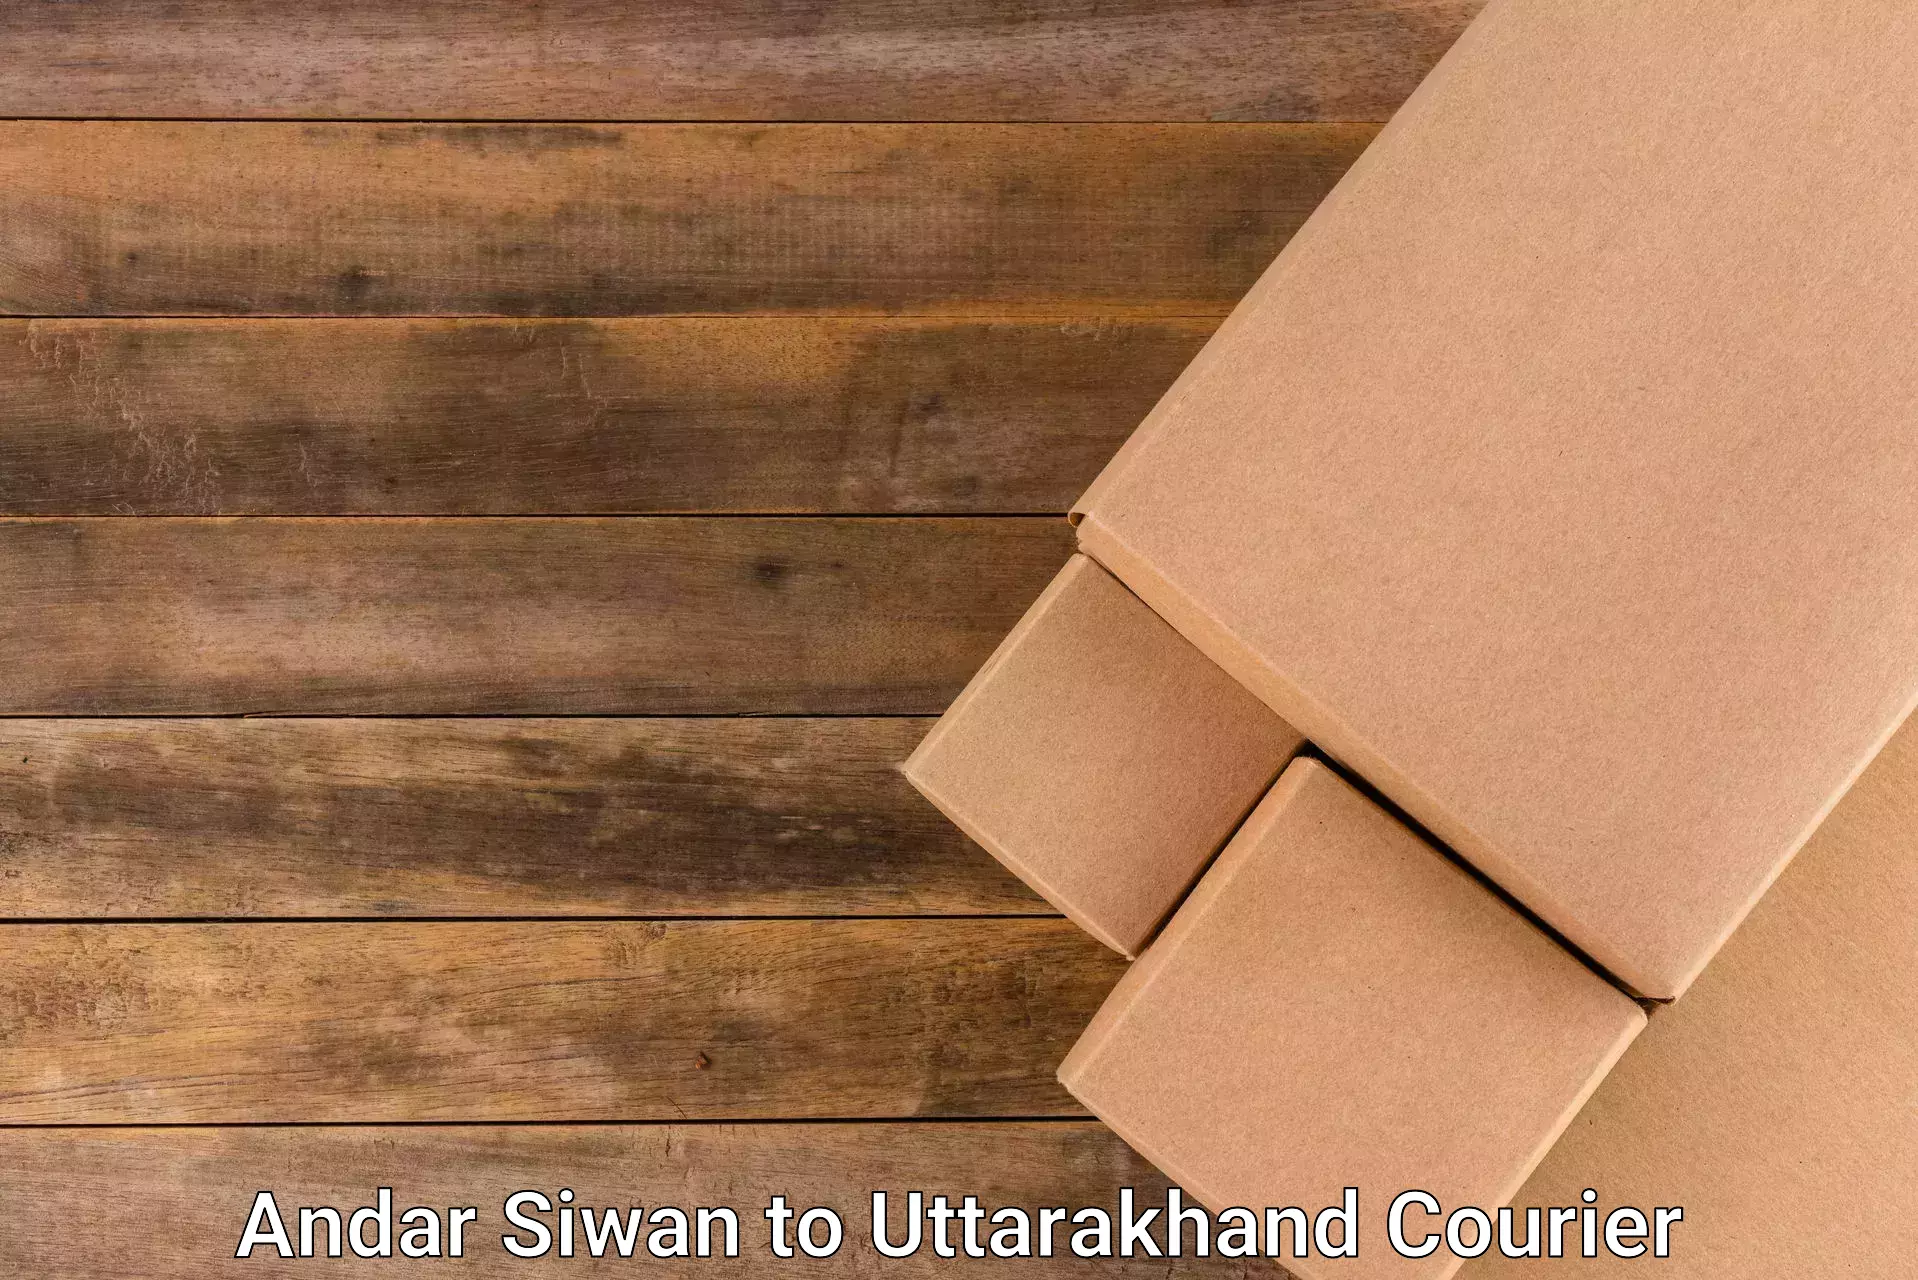 Efficient courier operations Andar Siwan to Bhagwanpur